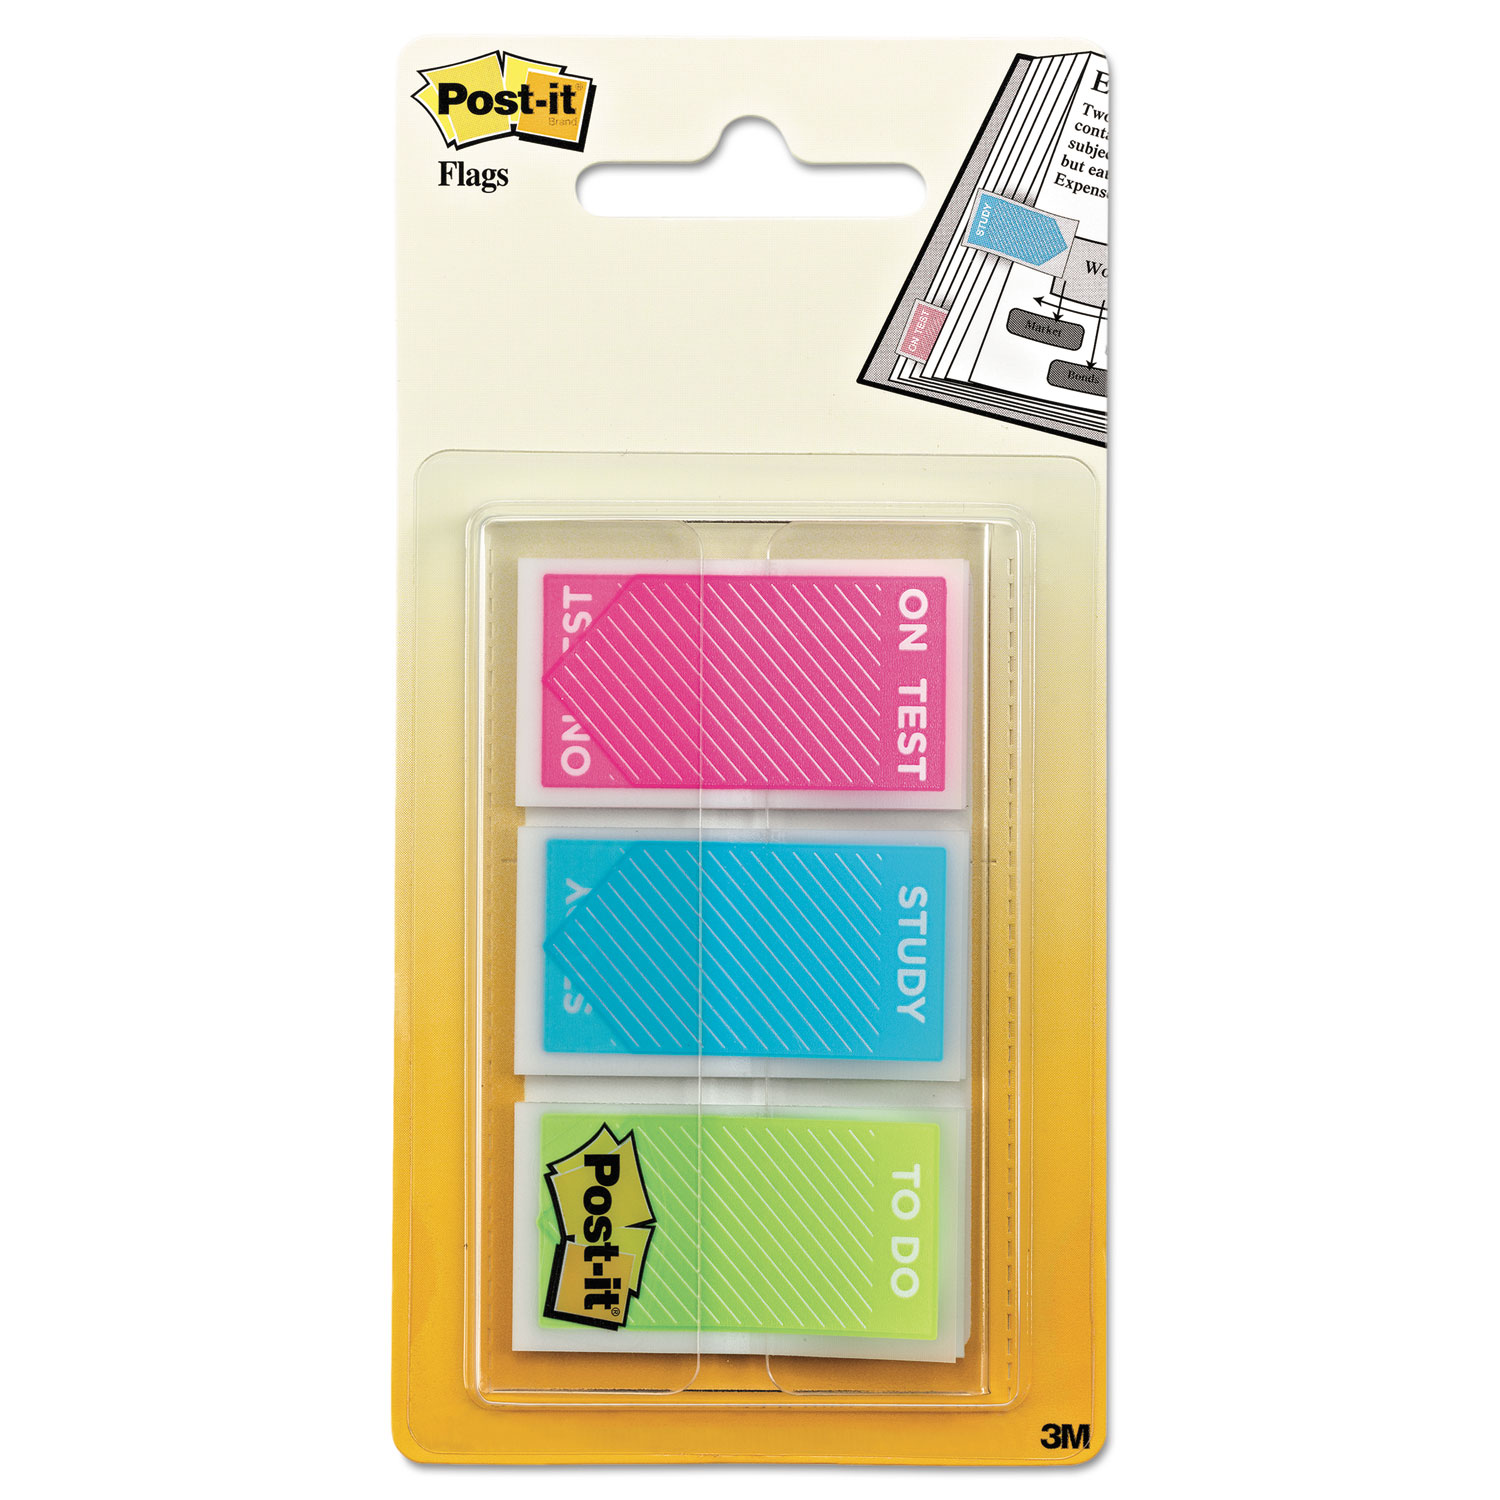  Post-it Flags 680-STUDY Study Memo Page Flags with Message, Assorted Bright Colors, 1, 60/Pack (MMM680STUDY) 